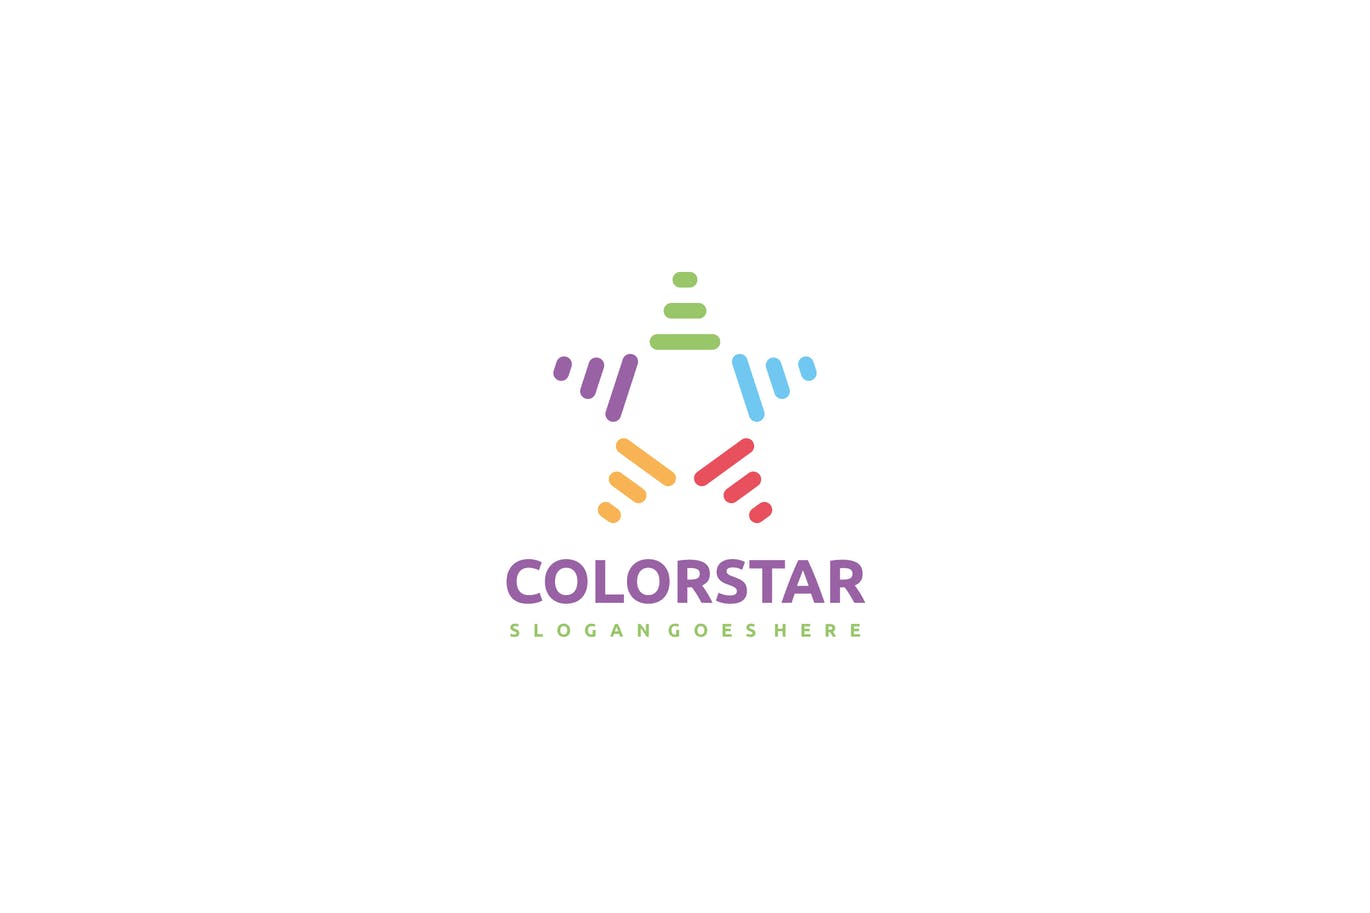 A colored star logo template